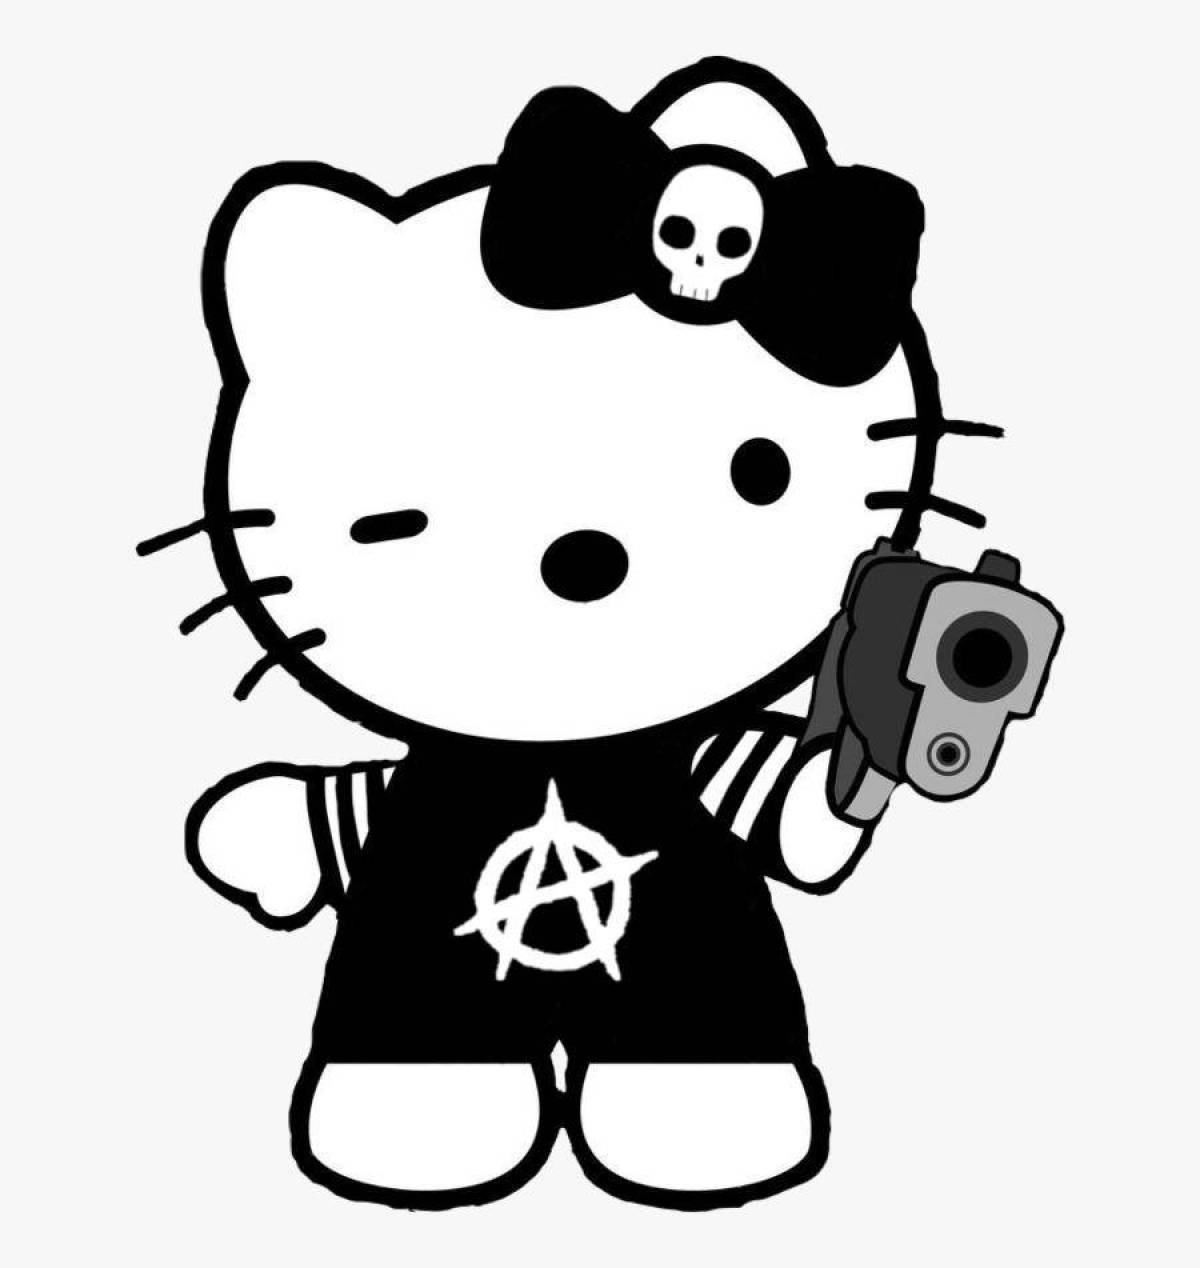 Witty hello kitty with a gun